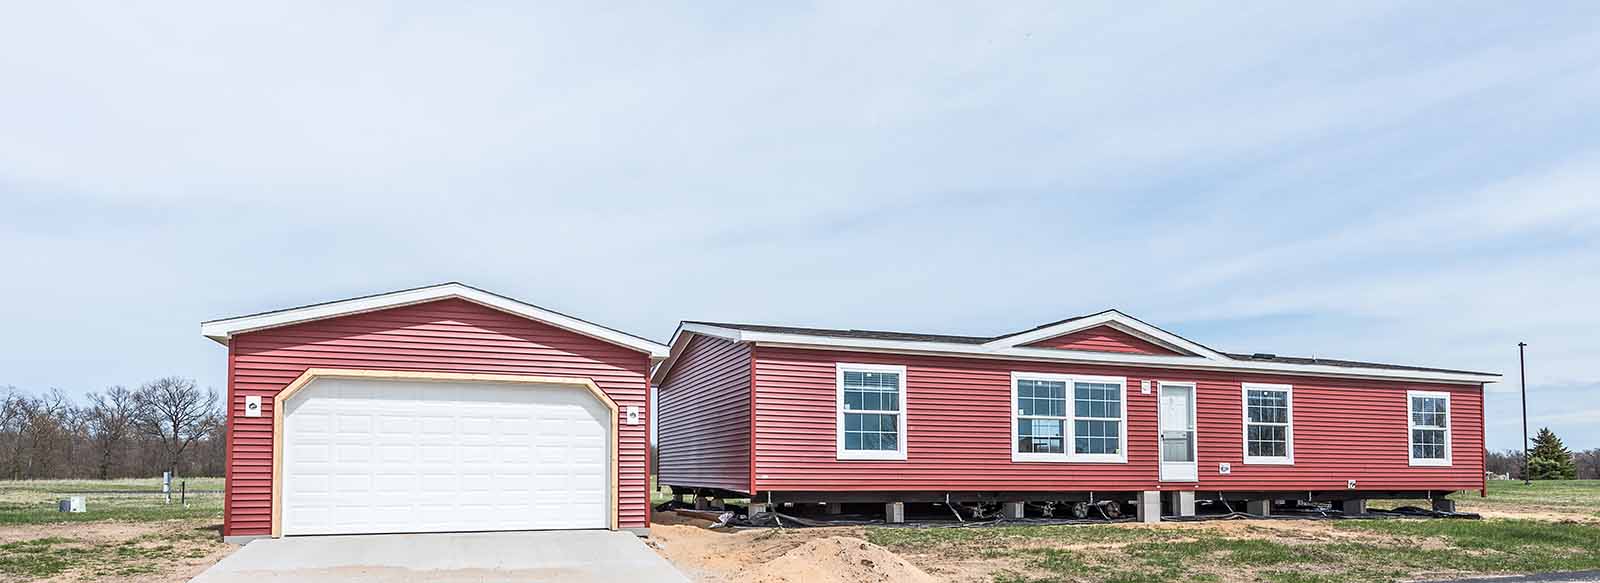 Loans for manufactured homes